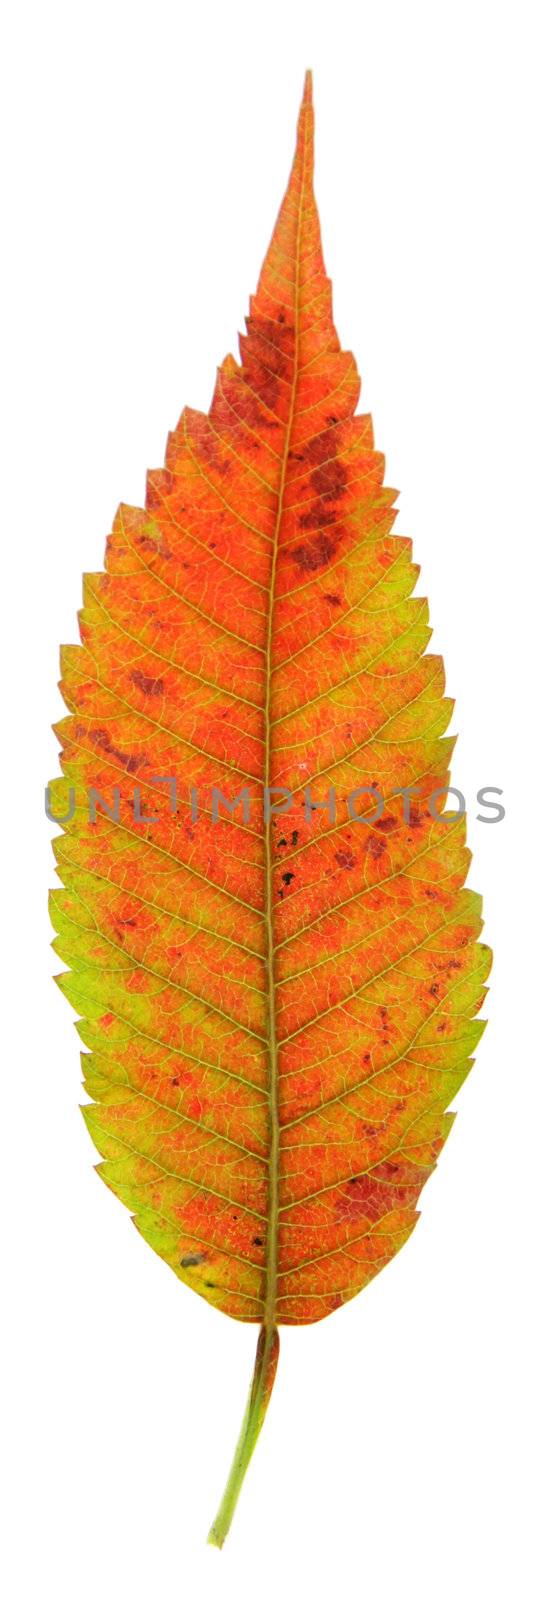 A Staghorn Sumac (Rhus typhina) leaf in fall color isolated on a white background.
